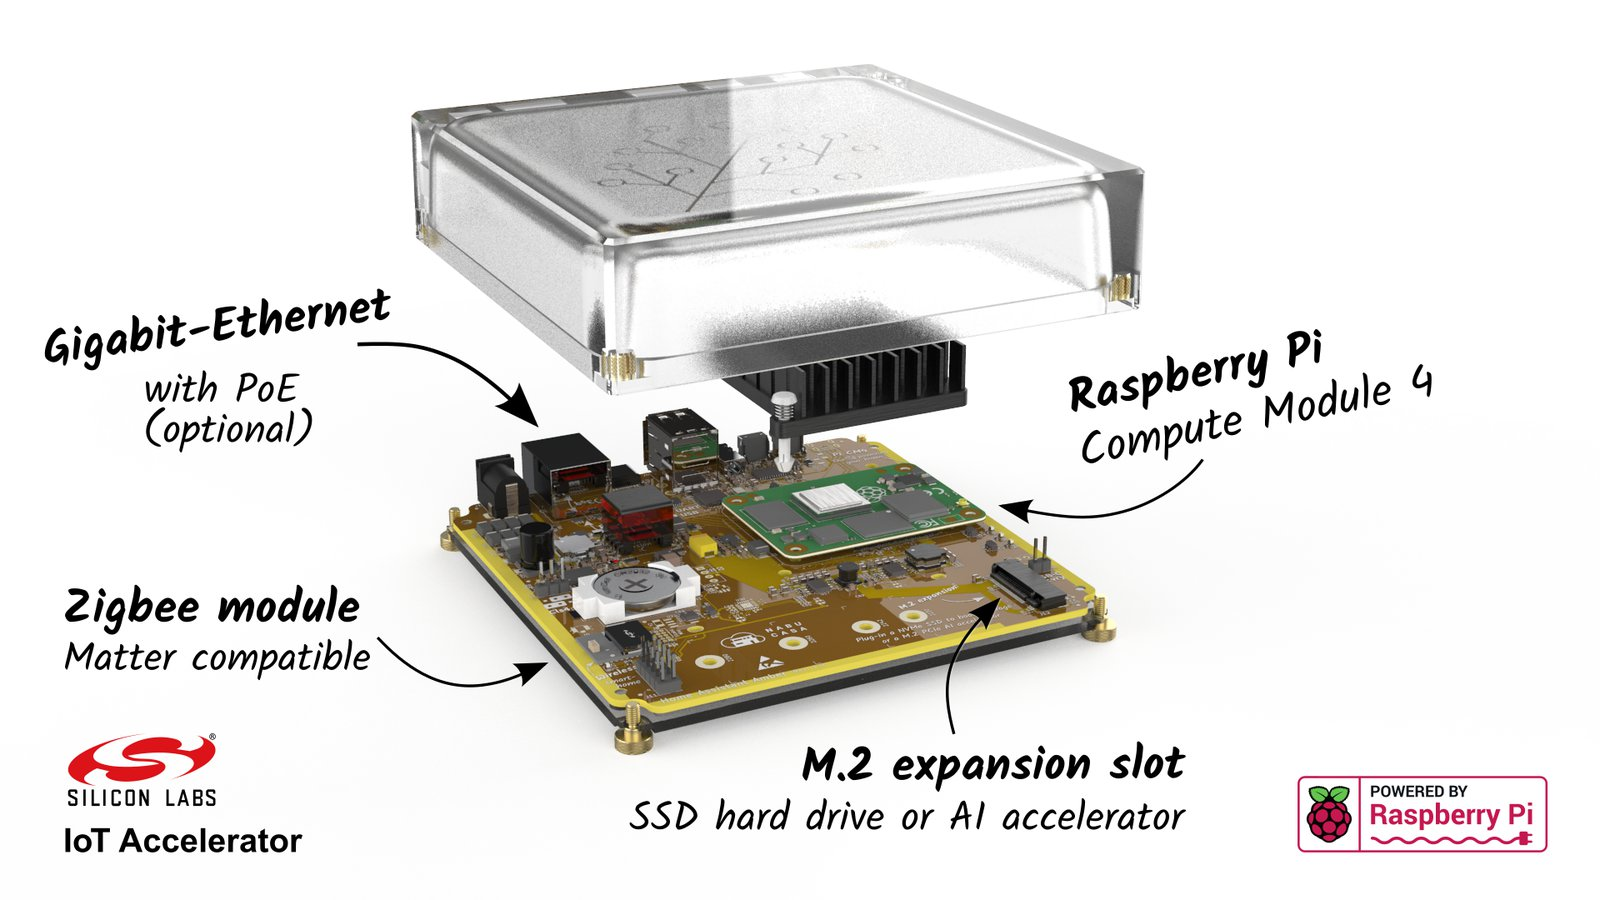 Rendering of the Home Assistant Yellow highlighting Raspberry Pi Compute Module 4, Gigabit-Ethernet with optional power-over-ethernet, Zigbee module that is Matter compatible and an M.2 expansion slot for an SSD.